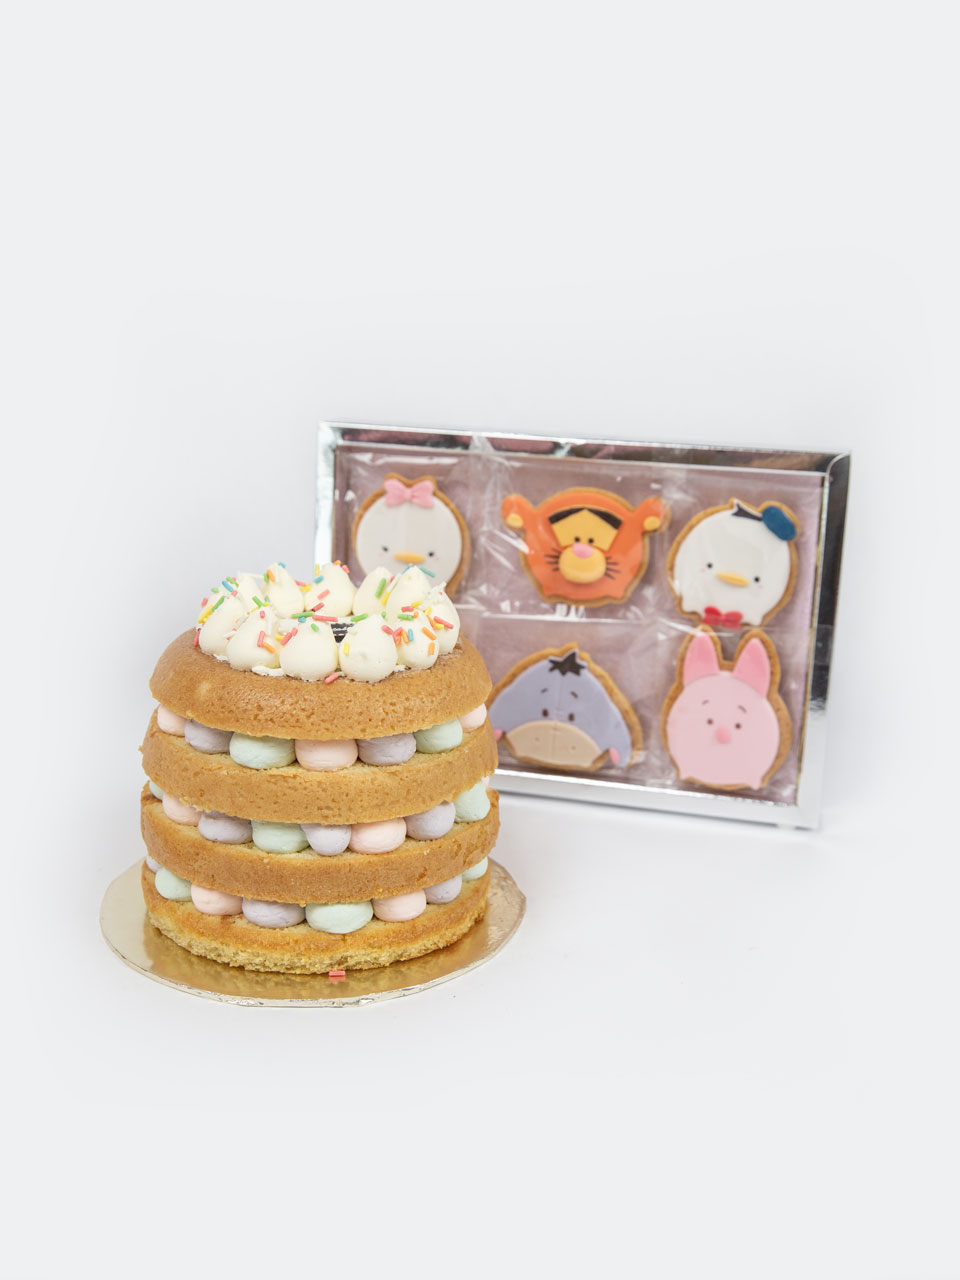 Delectable Kids Birthday Cake - Online birthday cake delivery Malaysia - Tsum Tsum